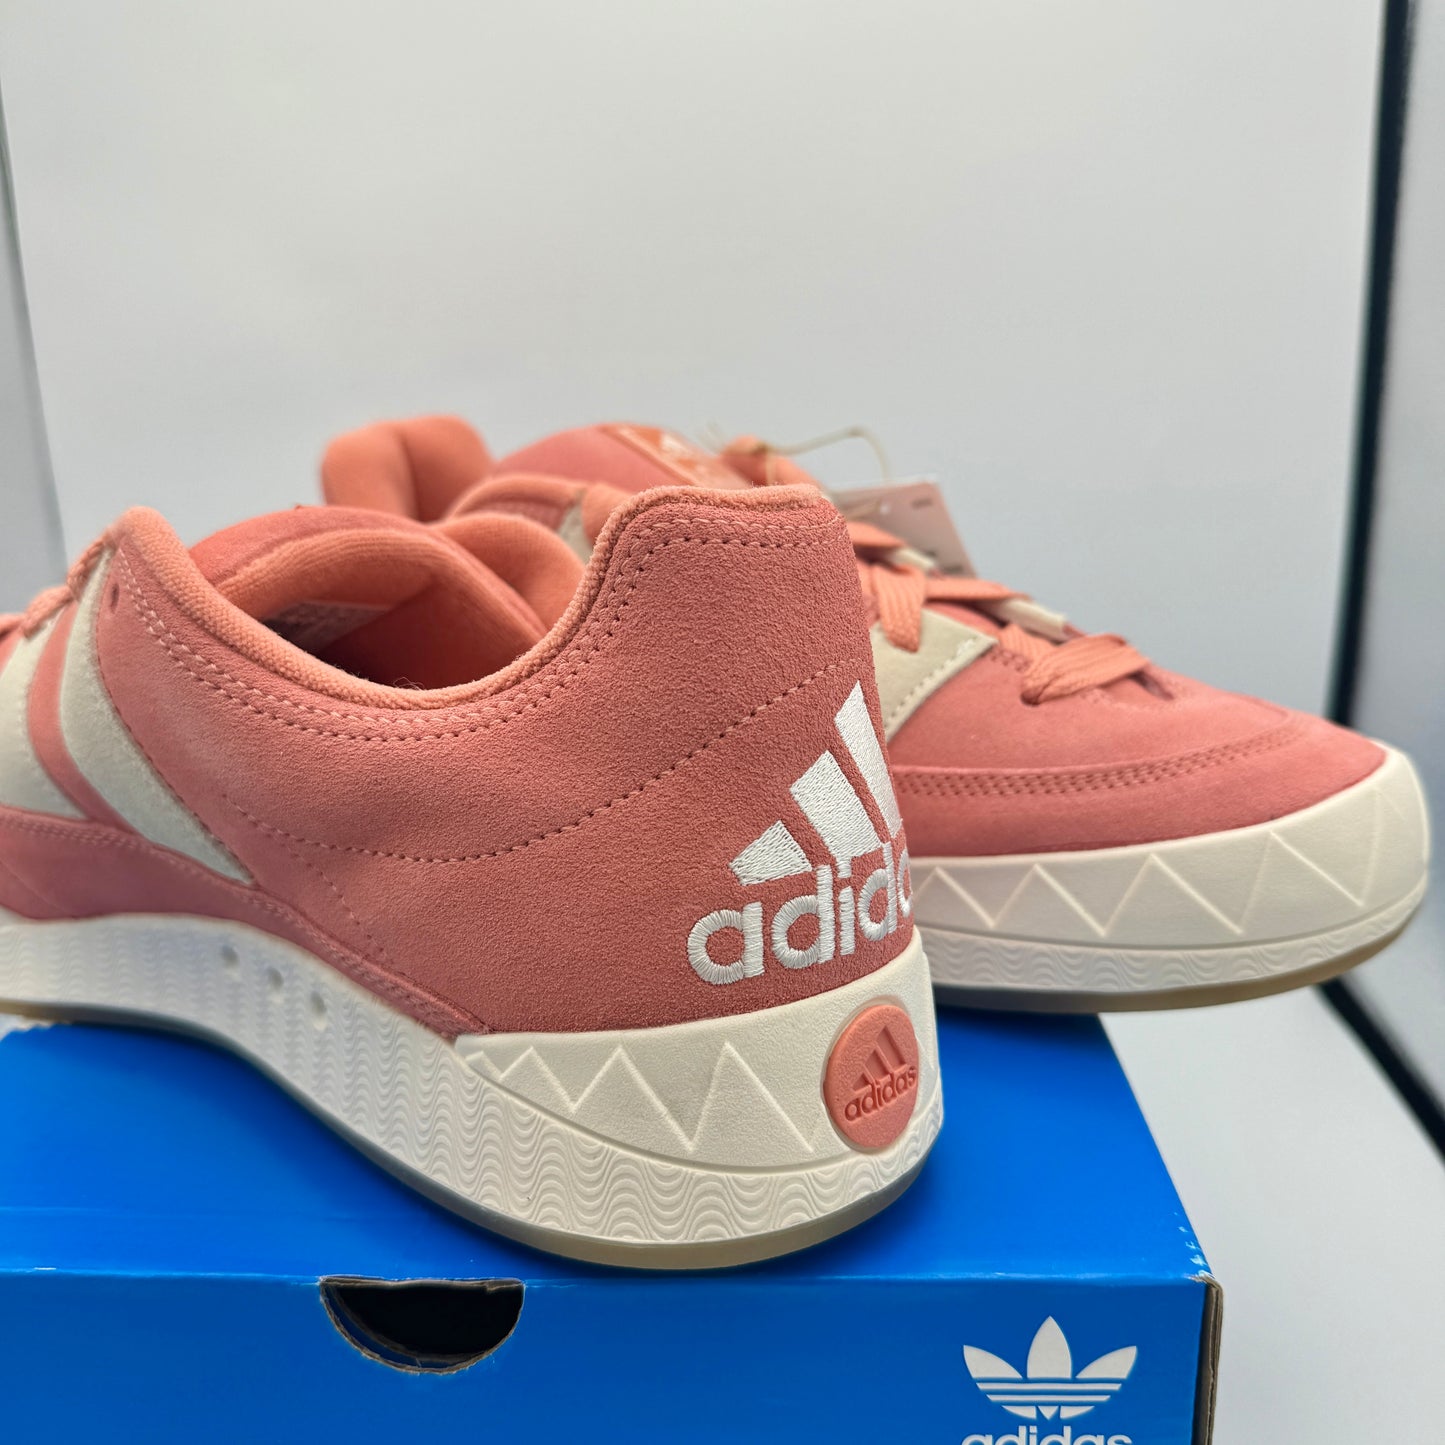 Adidas Originals Adimatic Sneakers Wonderclay Salmon Shoes Suede Leather